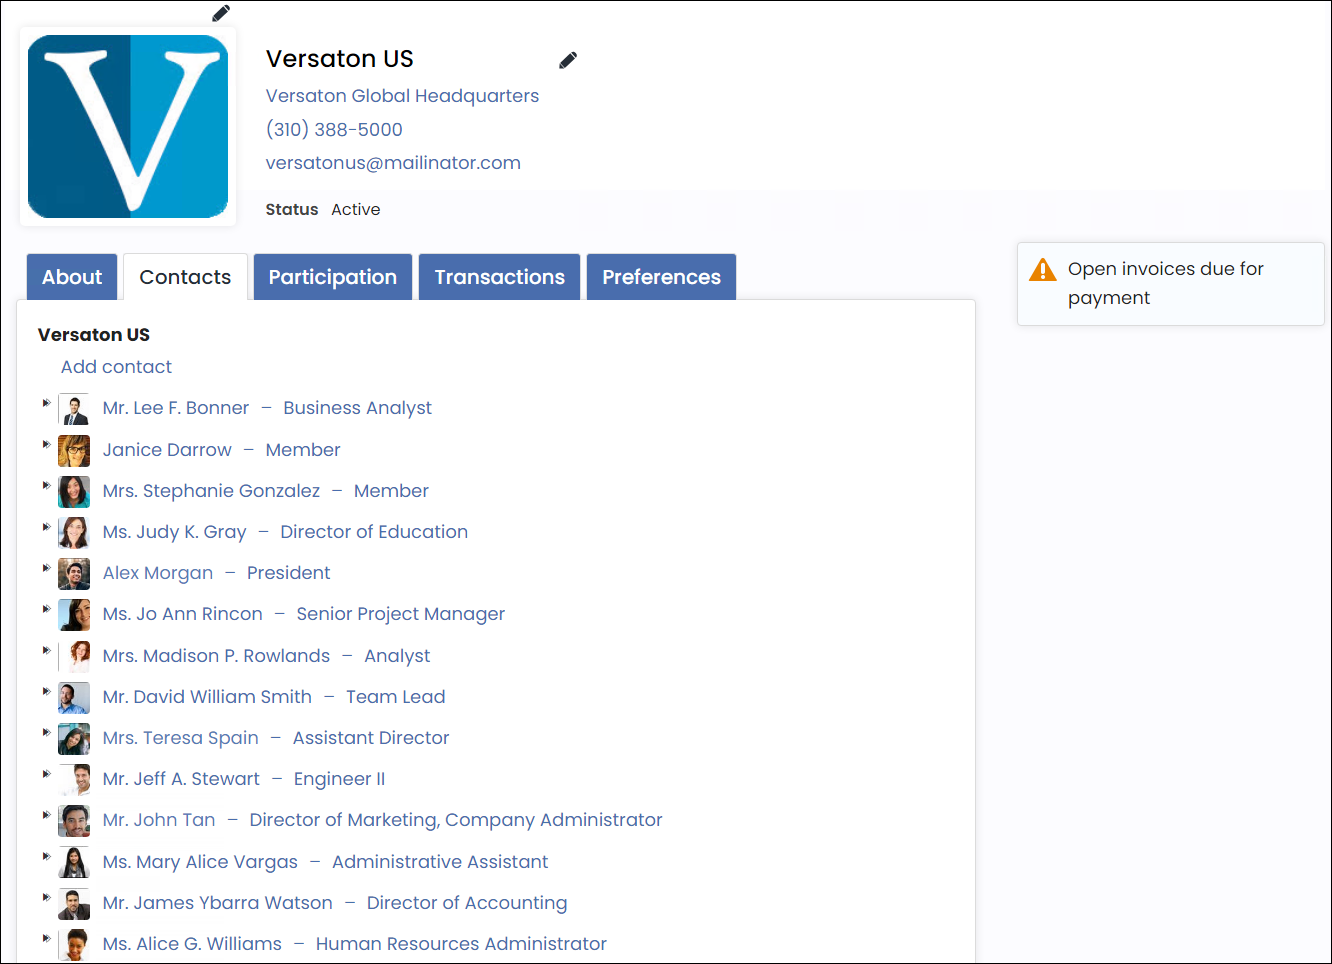 View of organization account page with "Contacts" tab selected